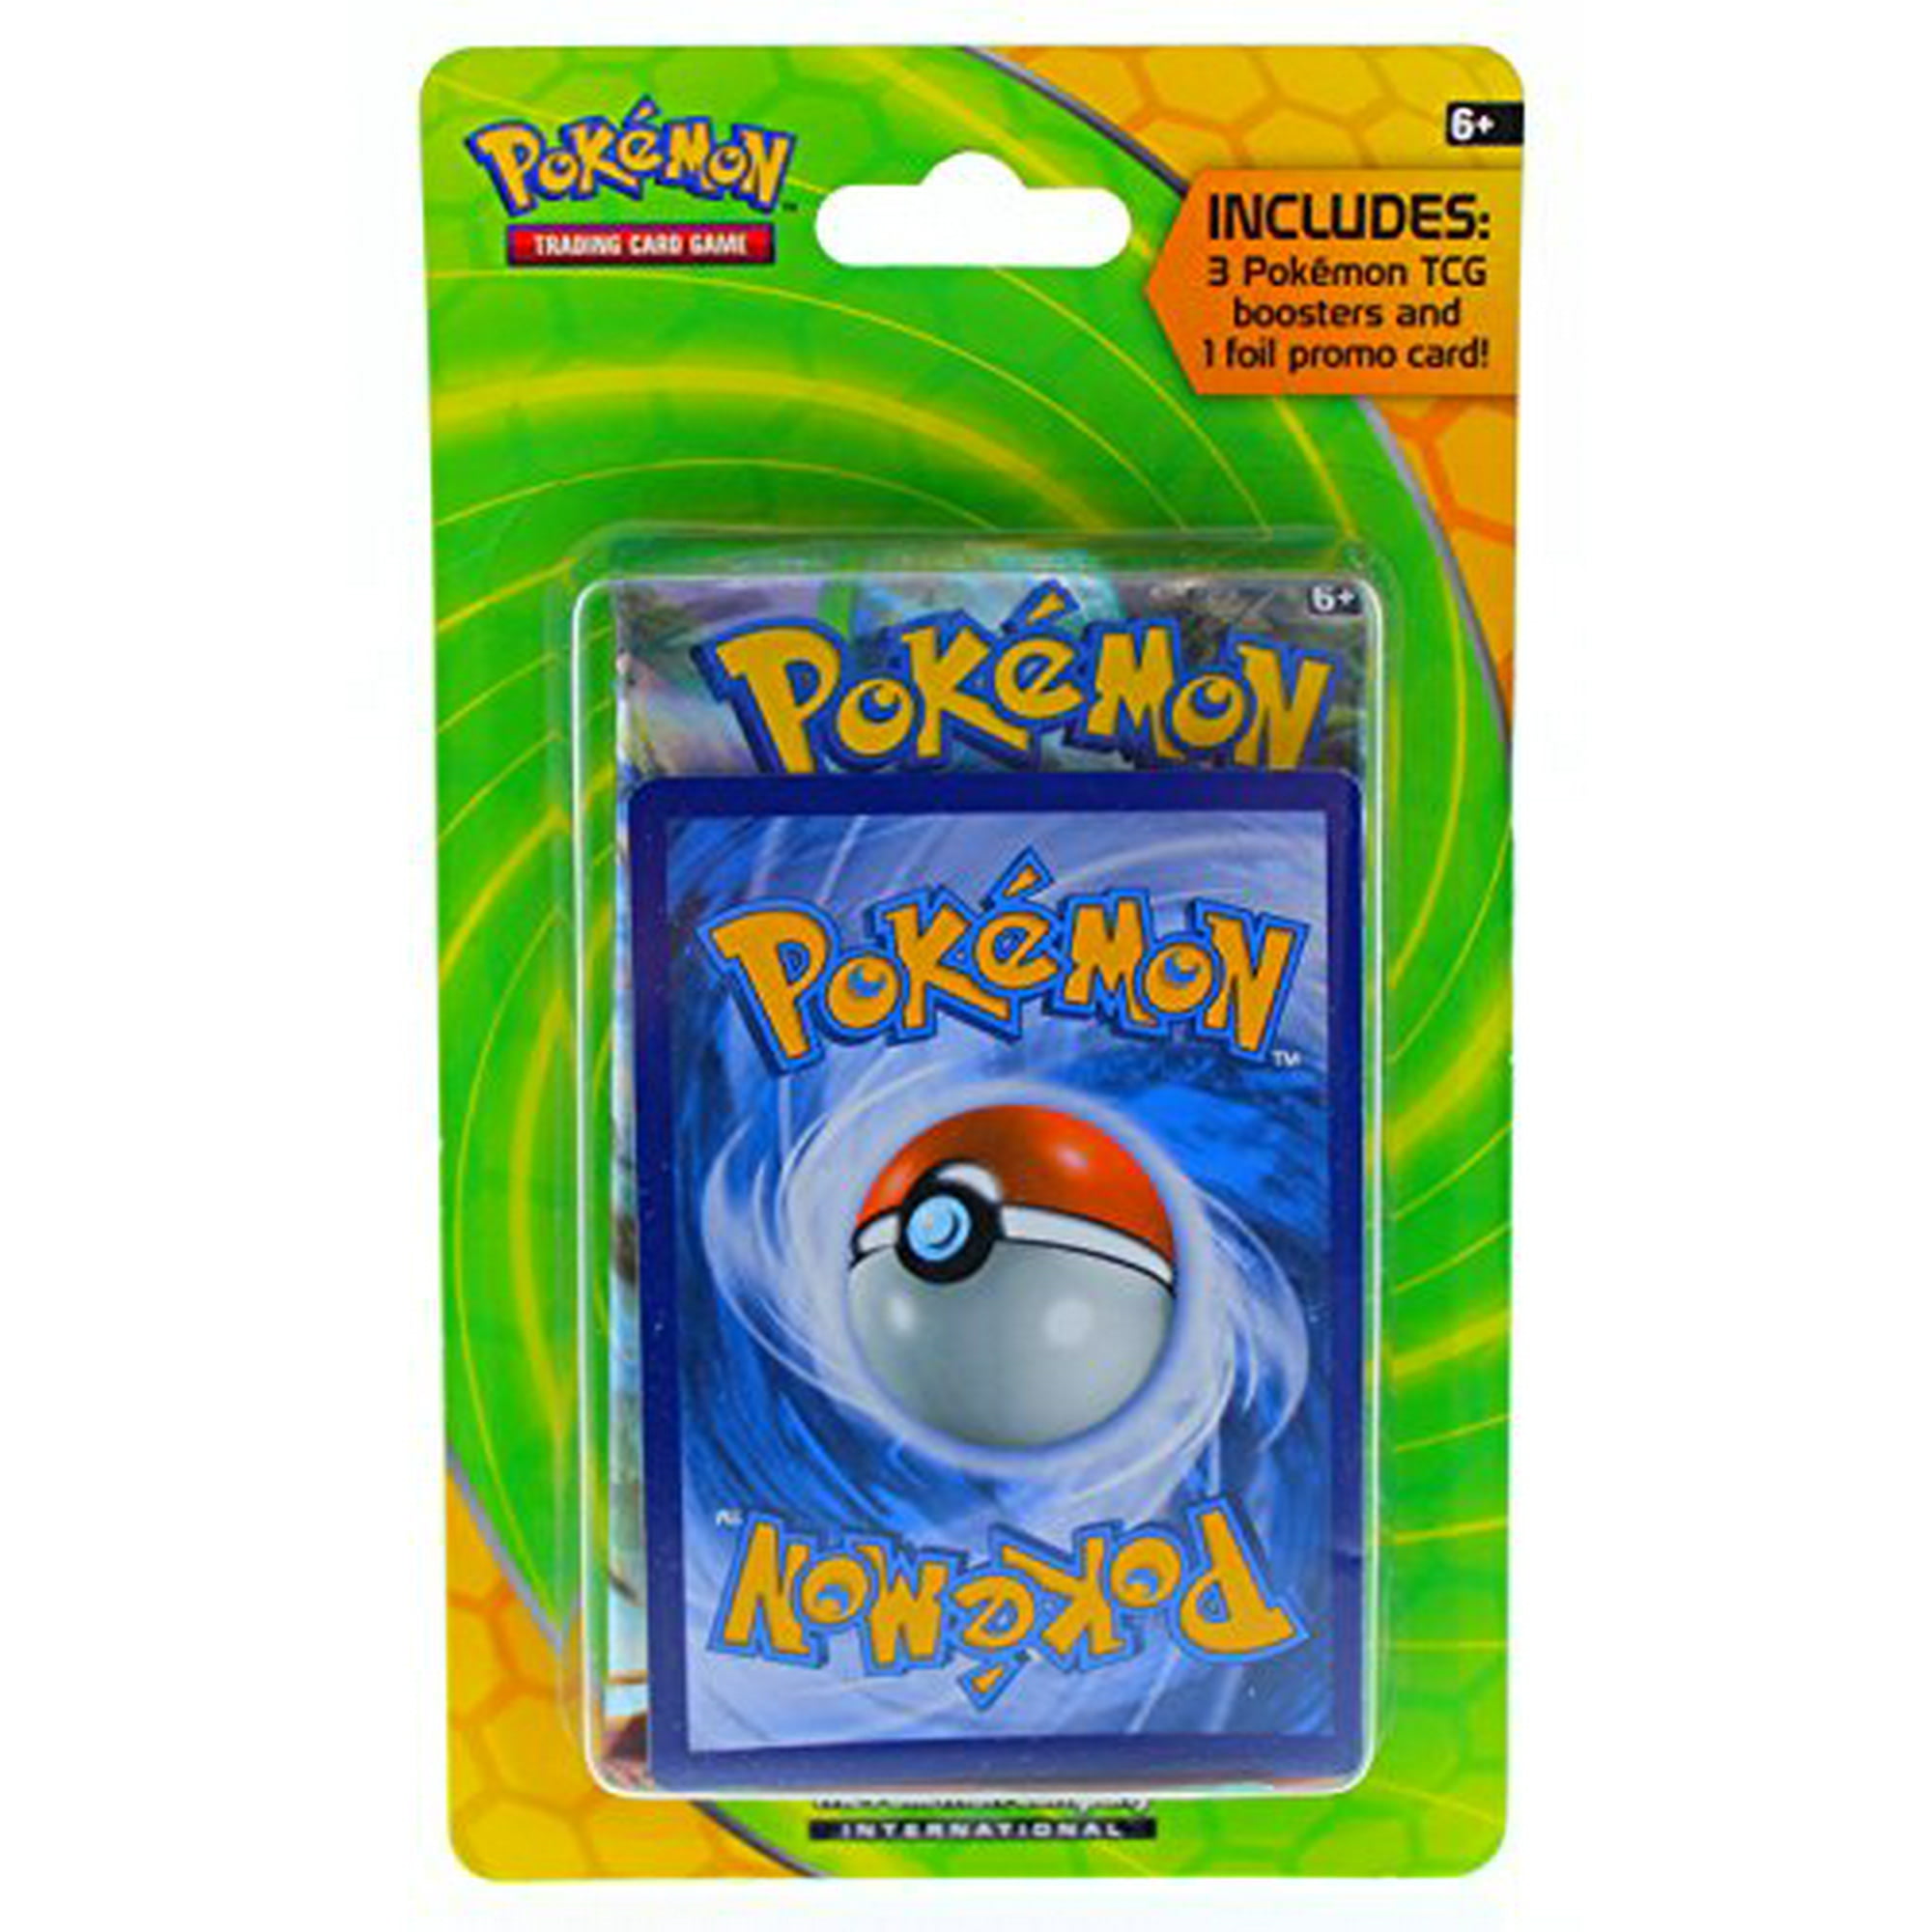 Pokemon Tcg 3 Booster Packs 1 Random Foil Value Pack Includes 3 Blister Packs Of Random Cards 1 Individually Packed Holofoil Promo Card Walmart Canada